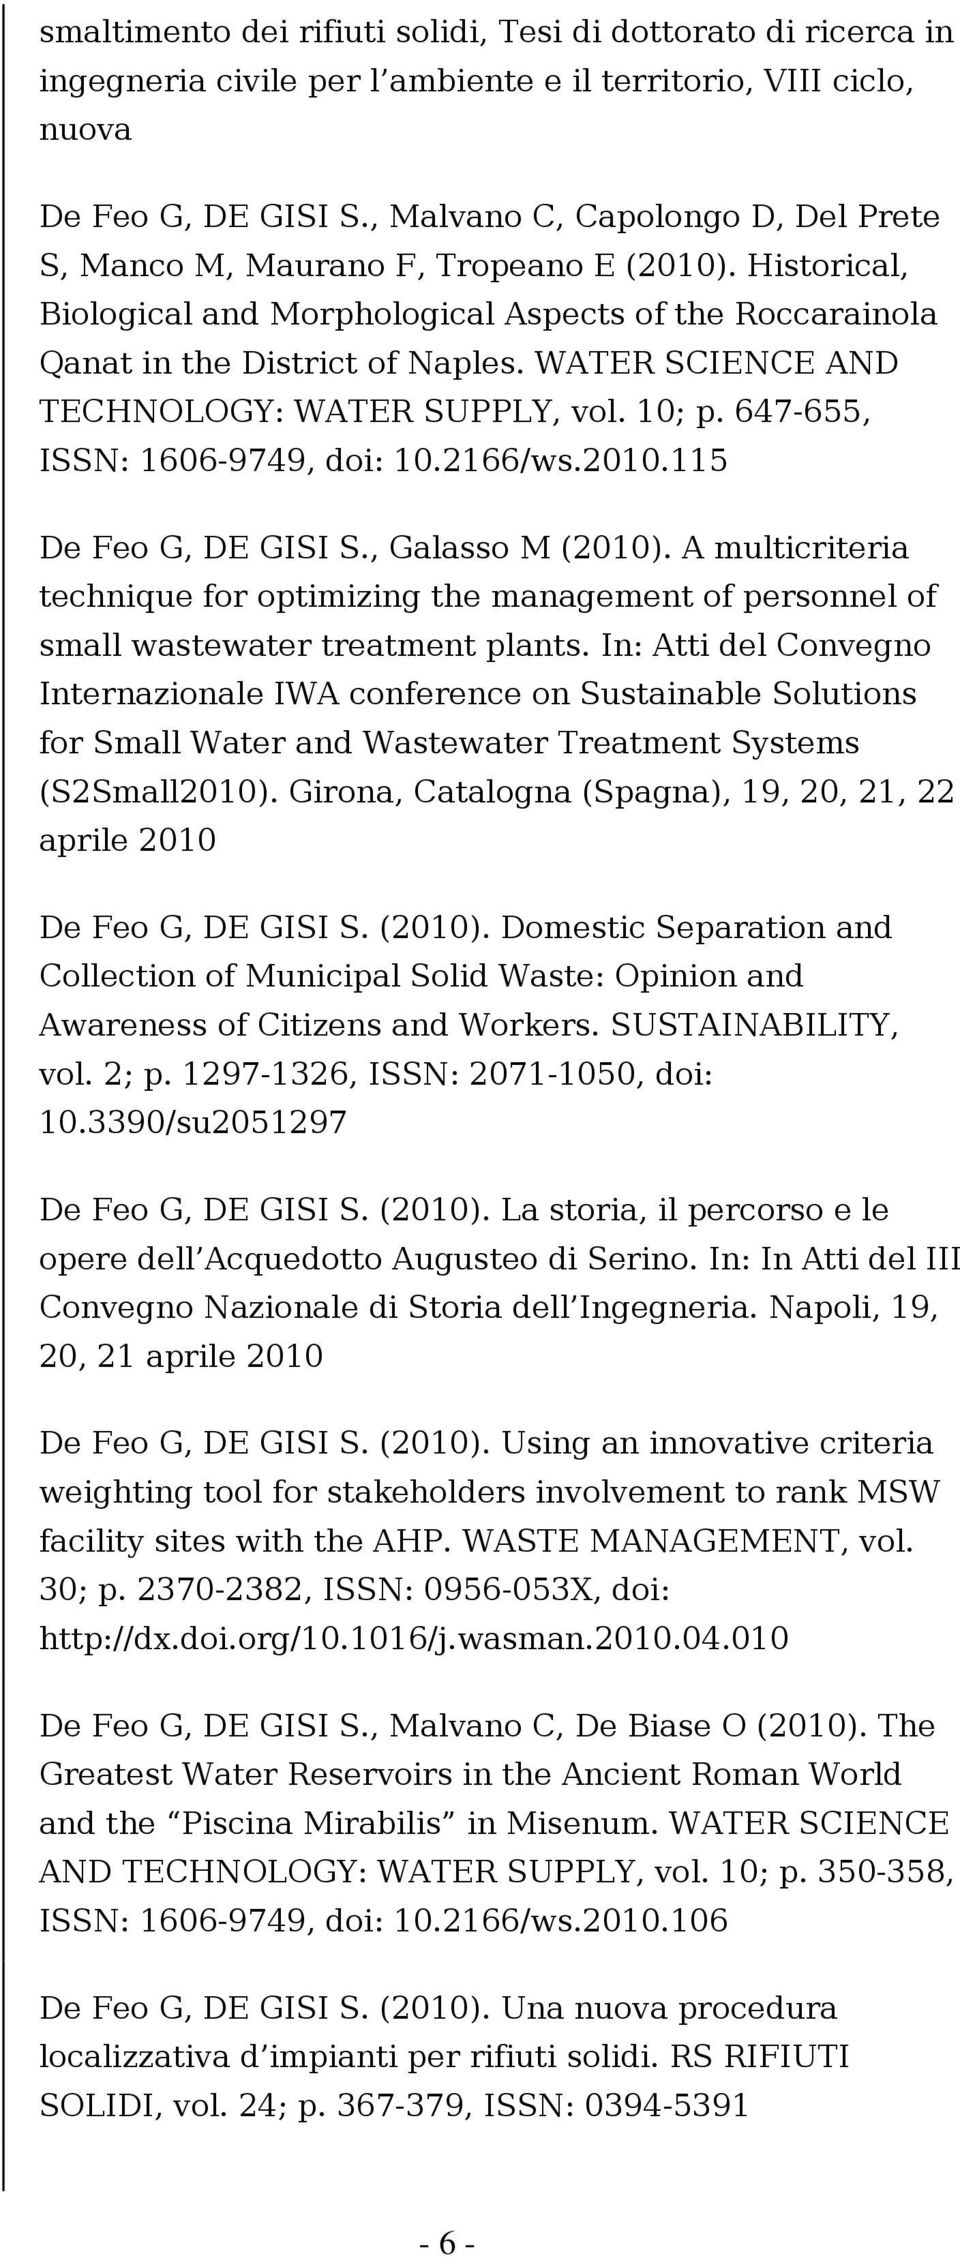 WATER SCIENCE AND TECHNOLOGY: WATER SUPPLY, vol. 10; p. 647-655, ISSN: 1606-9749, doi: 10.2166/ws.2010.115 De Feo G, DE GISI S., Galasso M (2010).